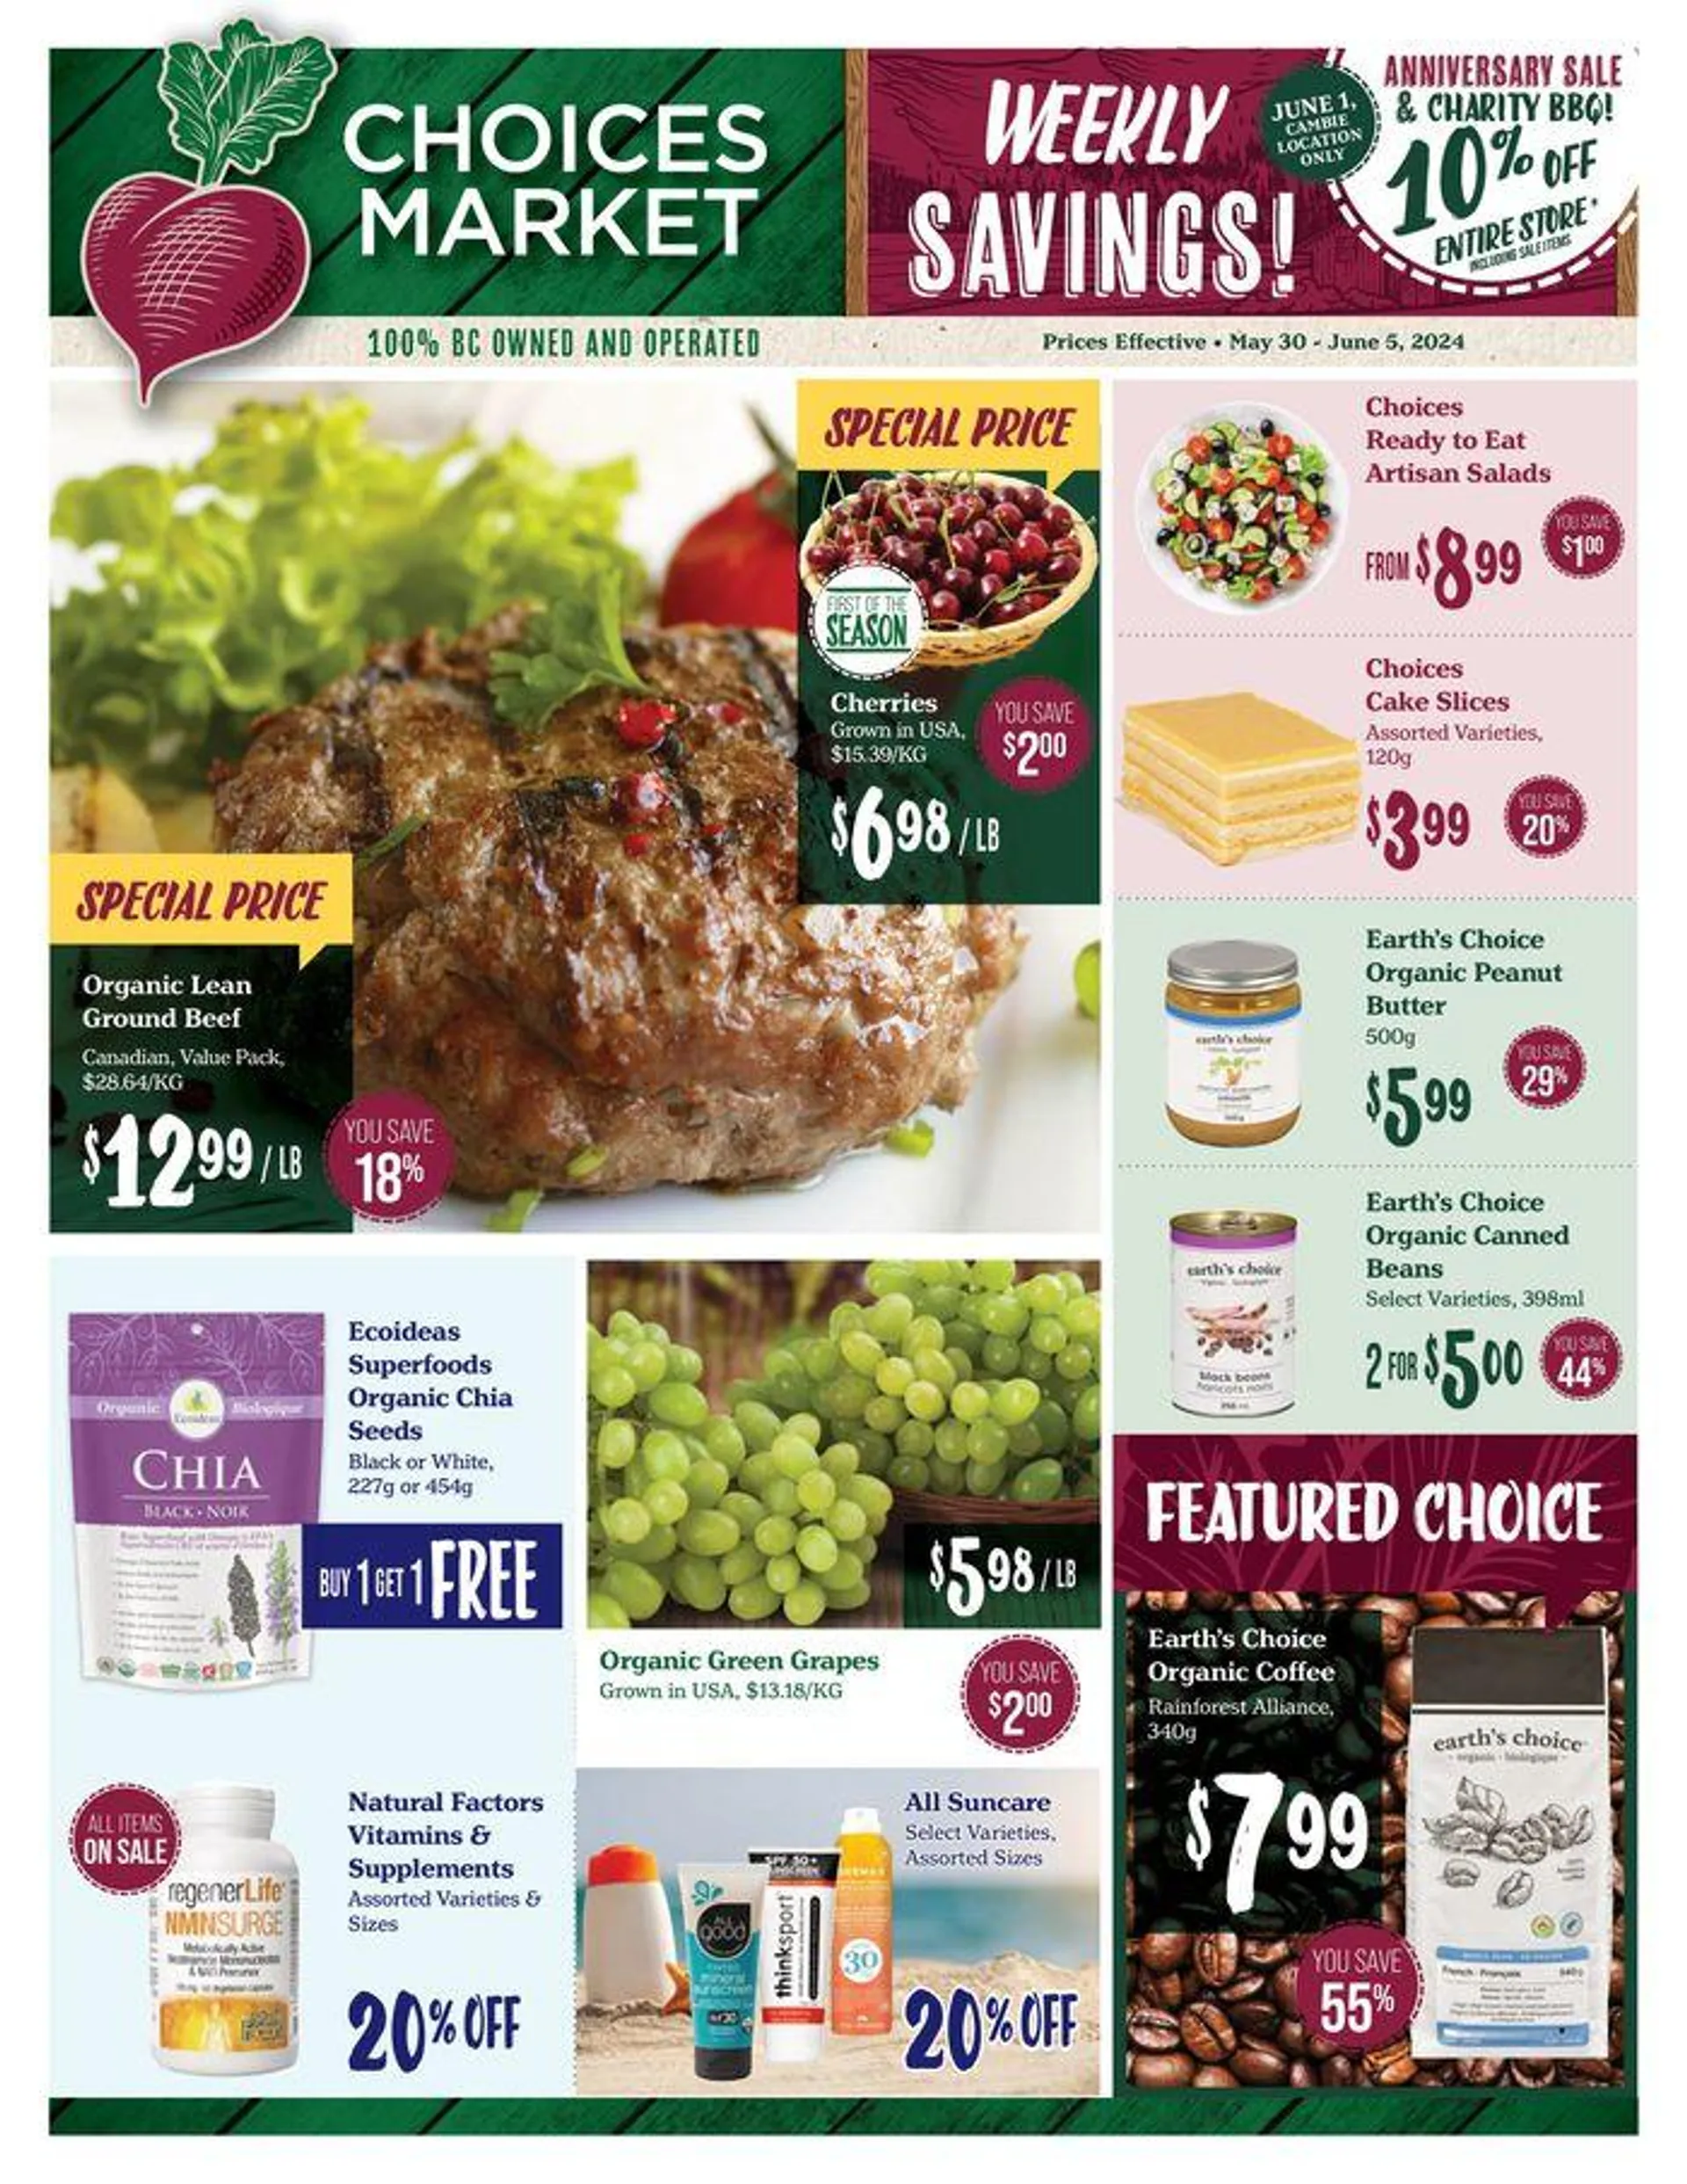 Choices Market weekly flyer - 1